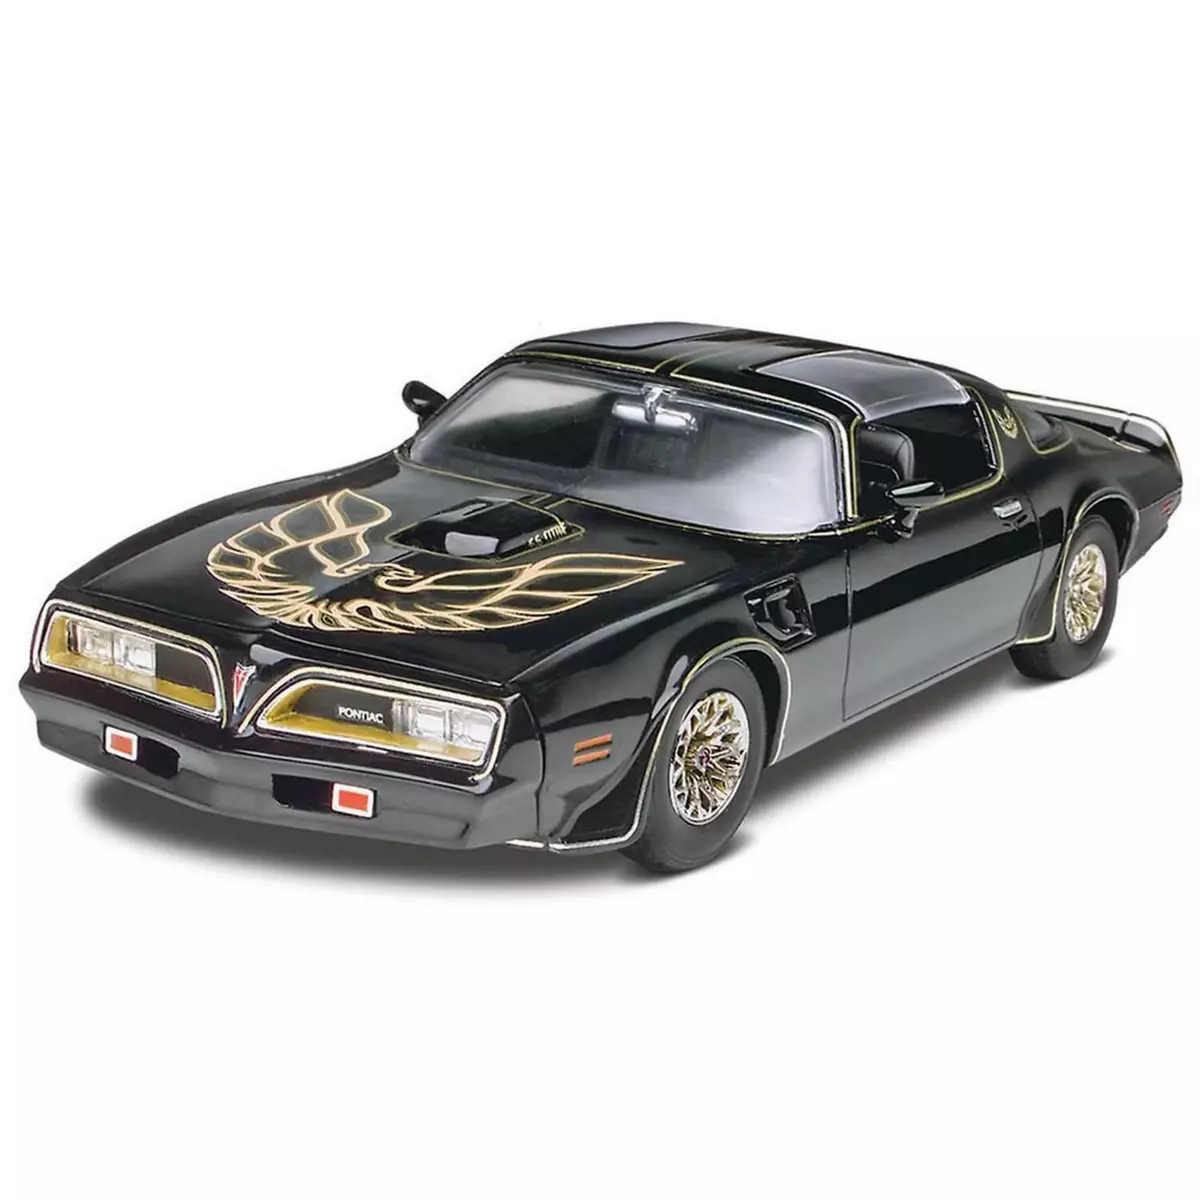 Revell Maquette voiture : Smokey and the Bandit 1977 Pontiac Firebird